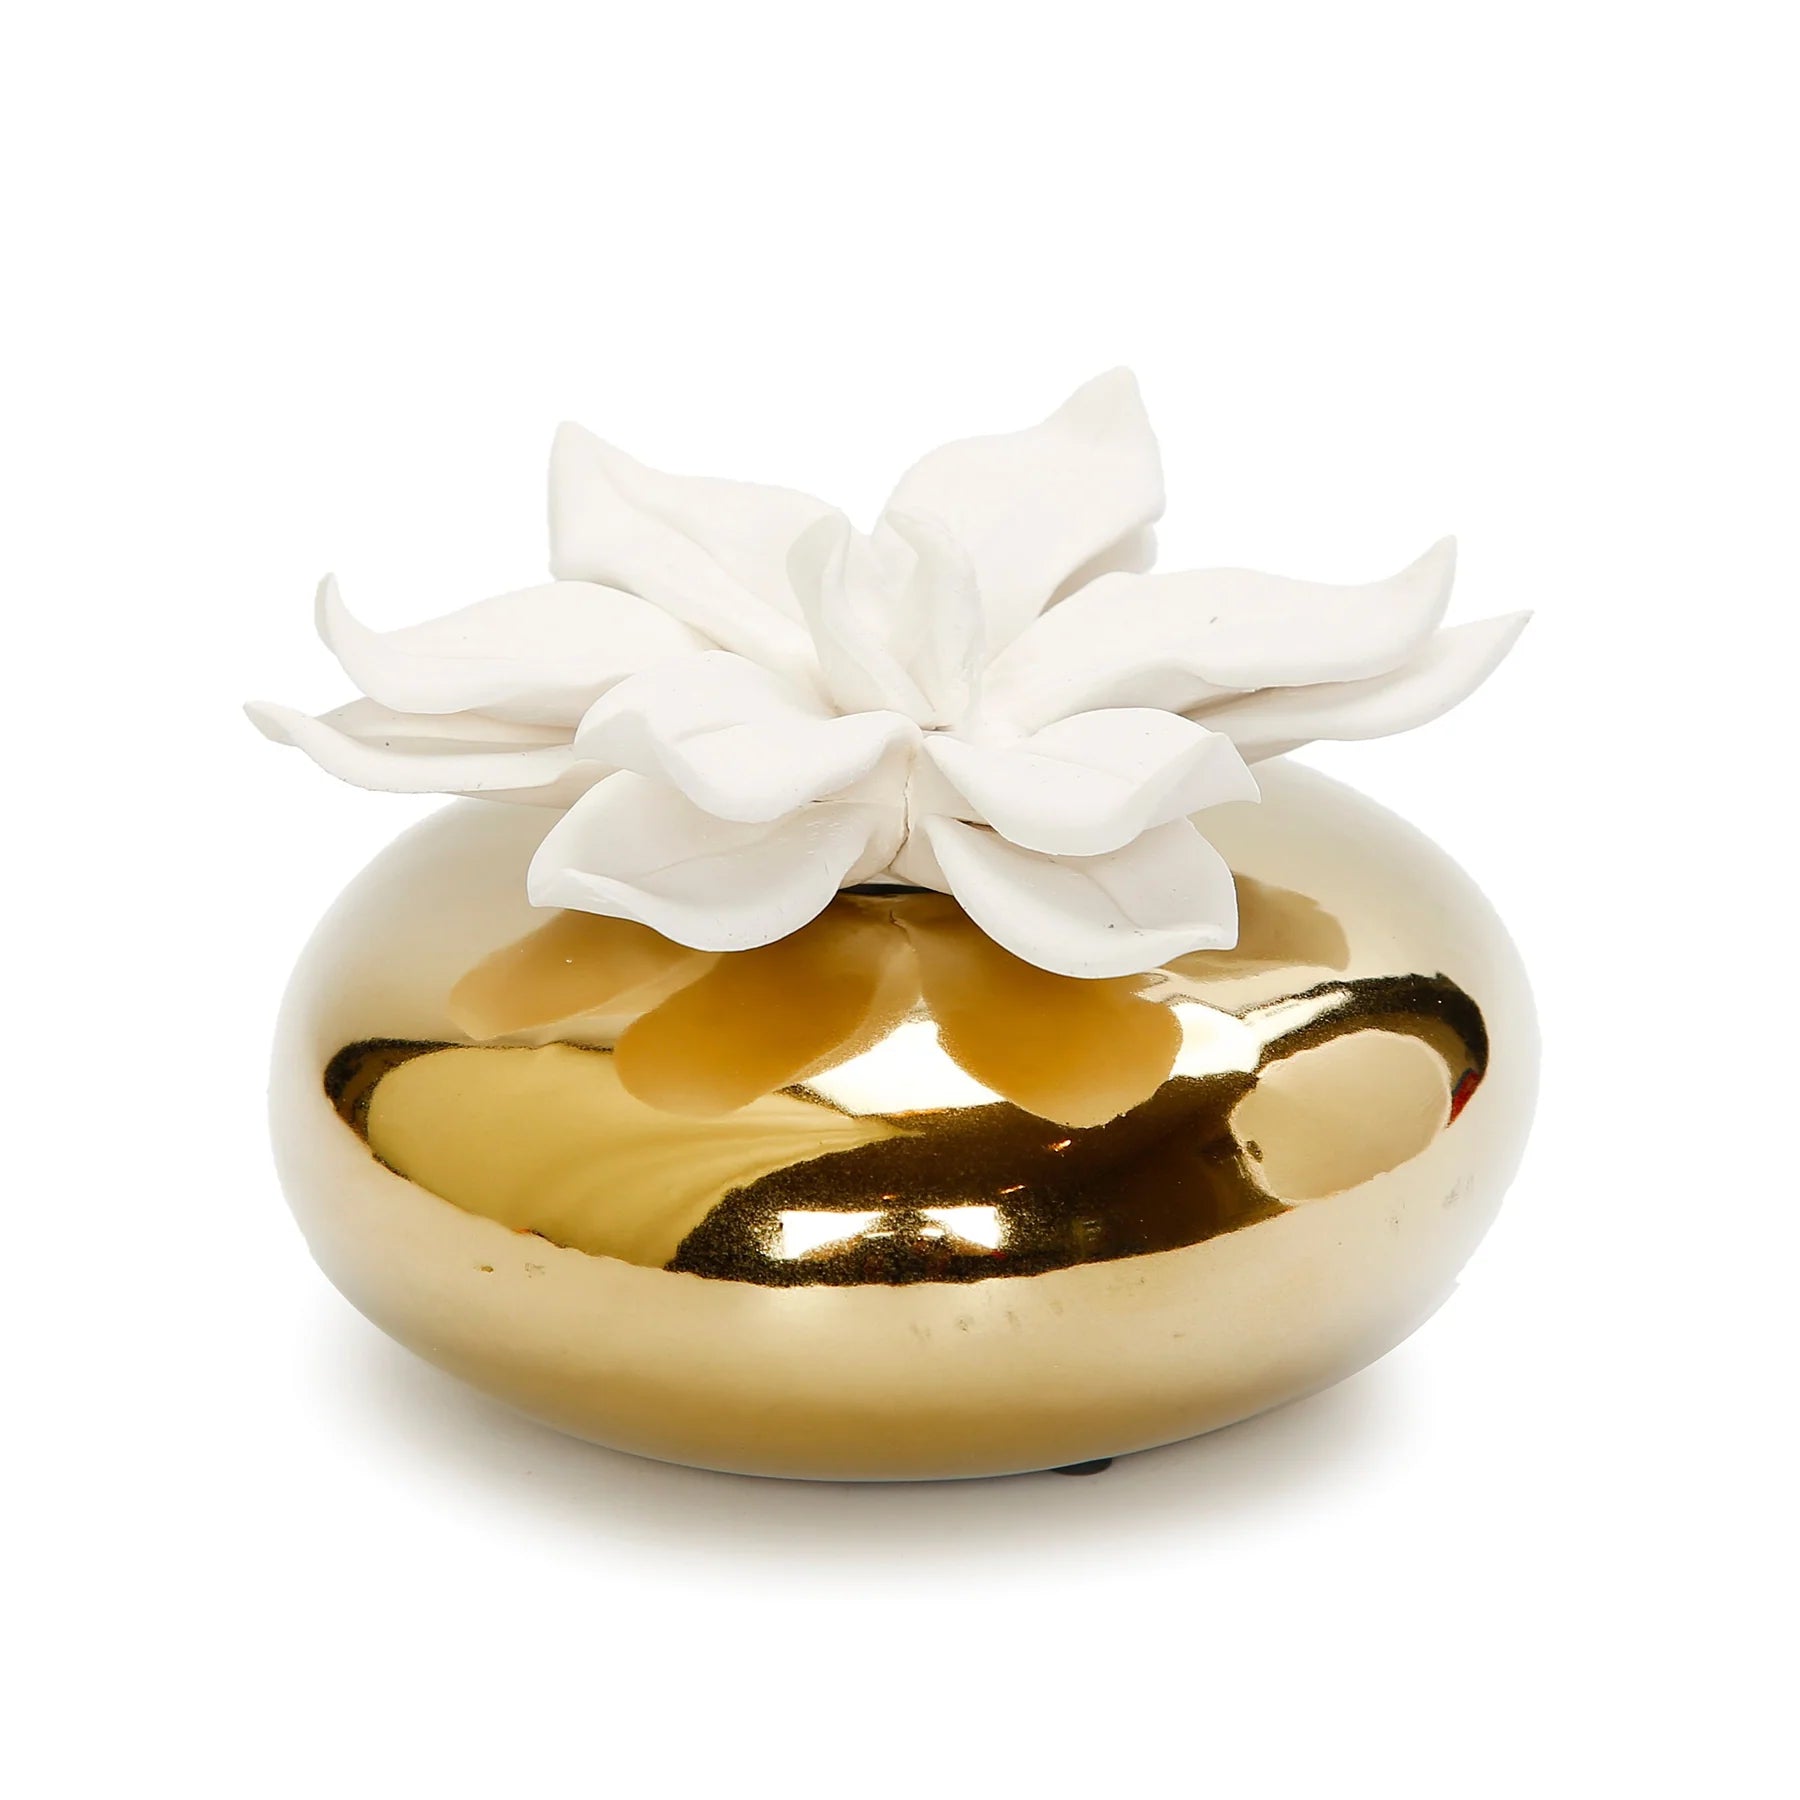 Gold Circular Diffuser With Dimensional White Flower, “Iris And Rose” Aroma